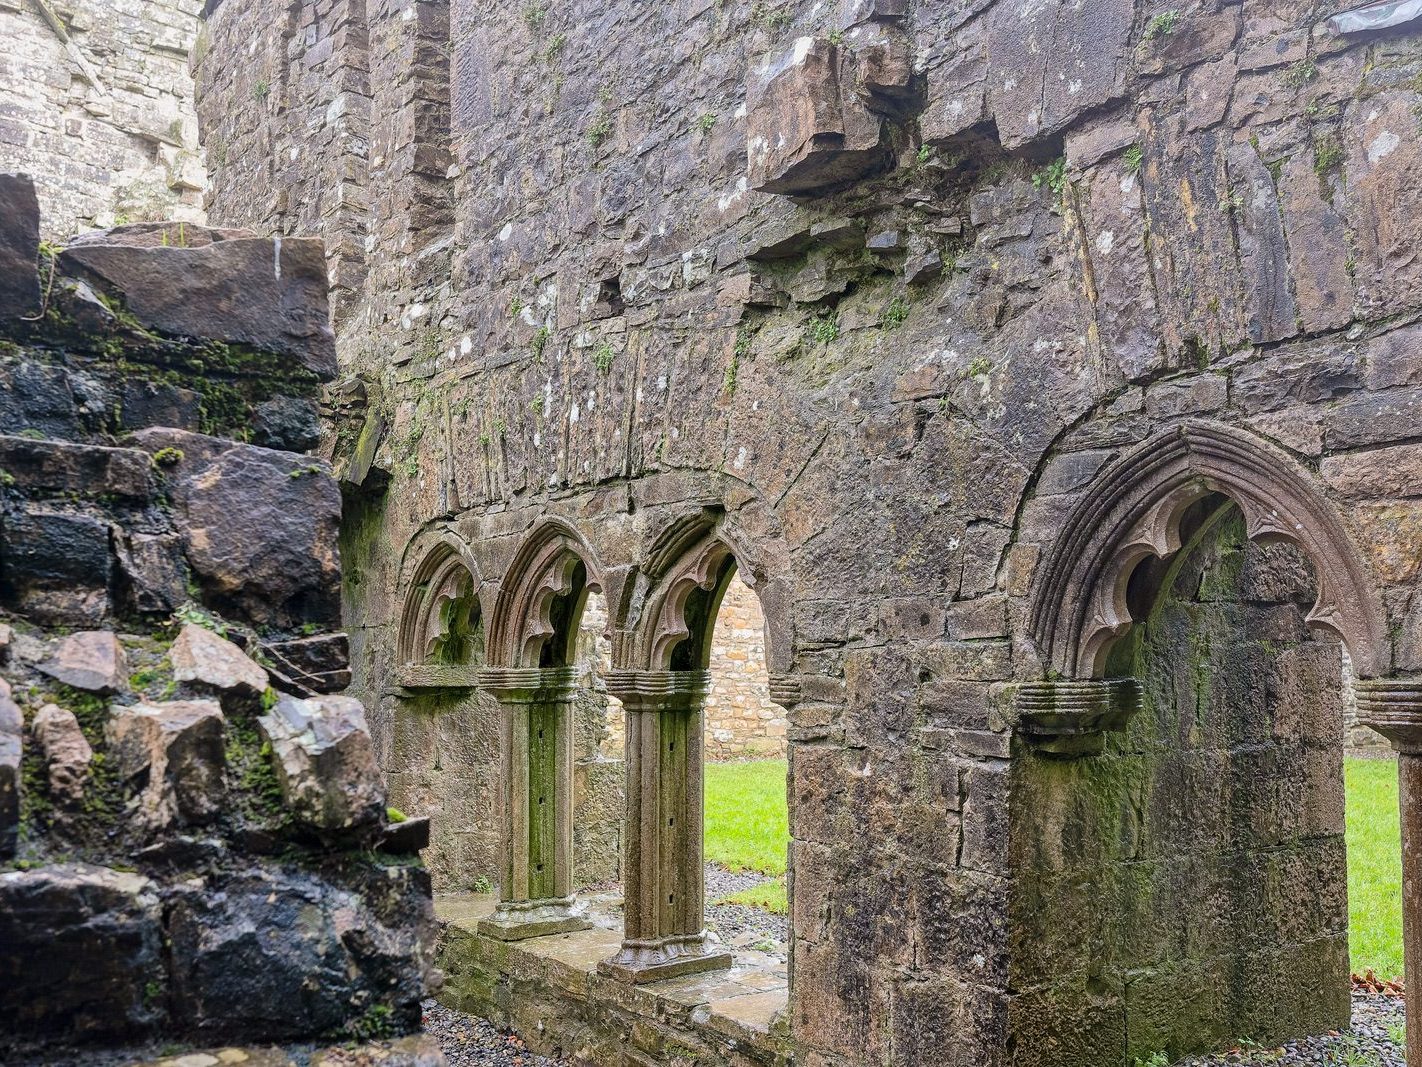 BECTIVE ABBEY WHICH I VISITED LAST CHRISTMAS [THERE WERE NO OTHER VISITORS AS IT WAS A VERY WET DAY]--225230-1